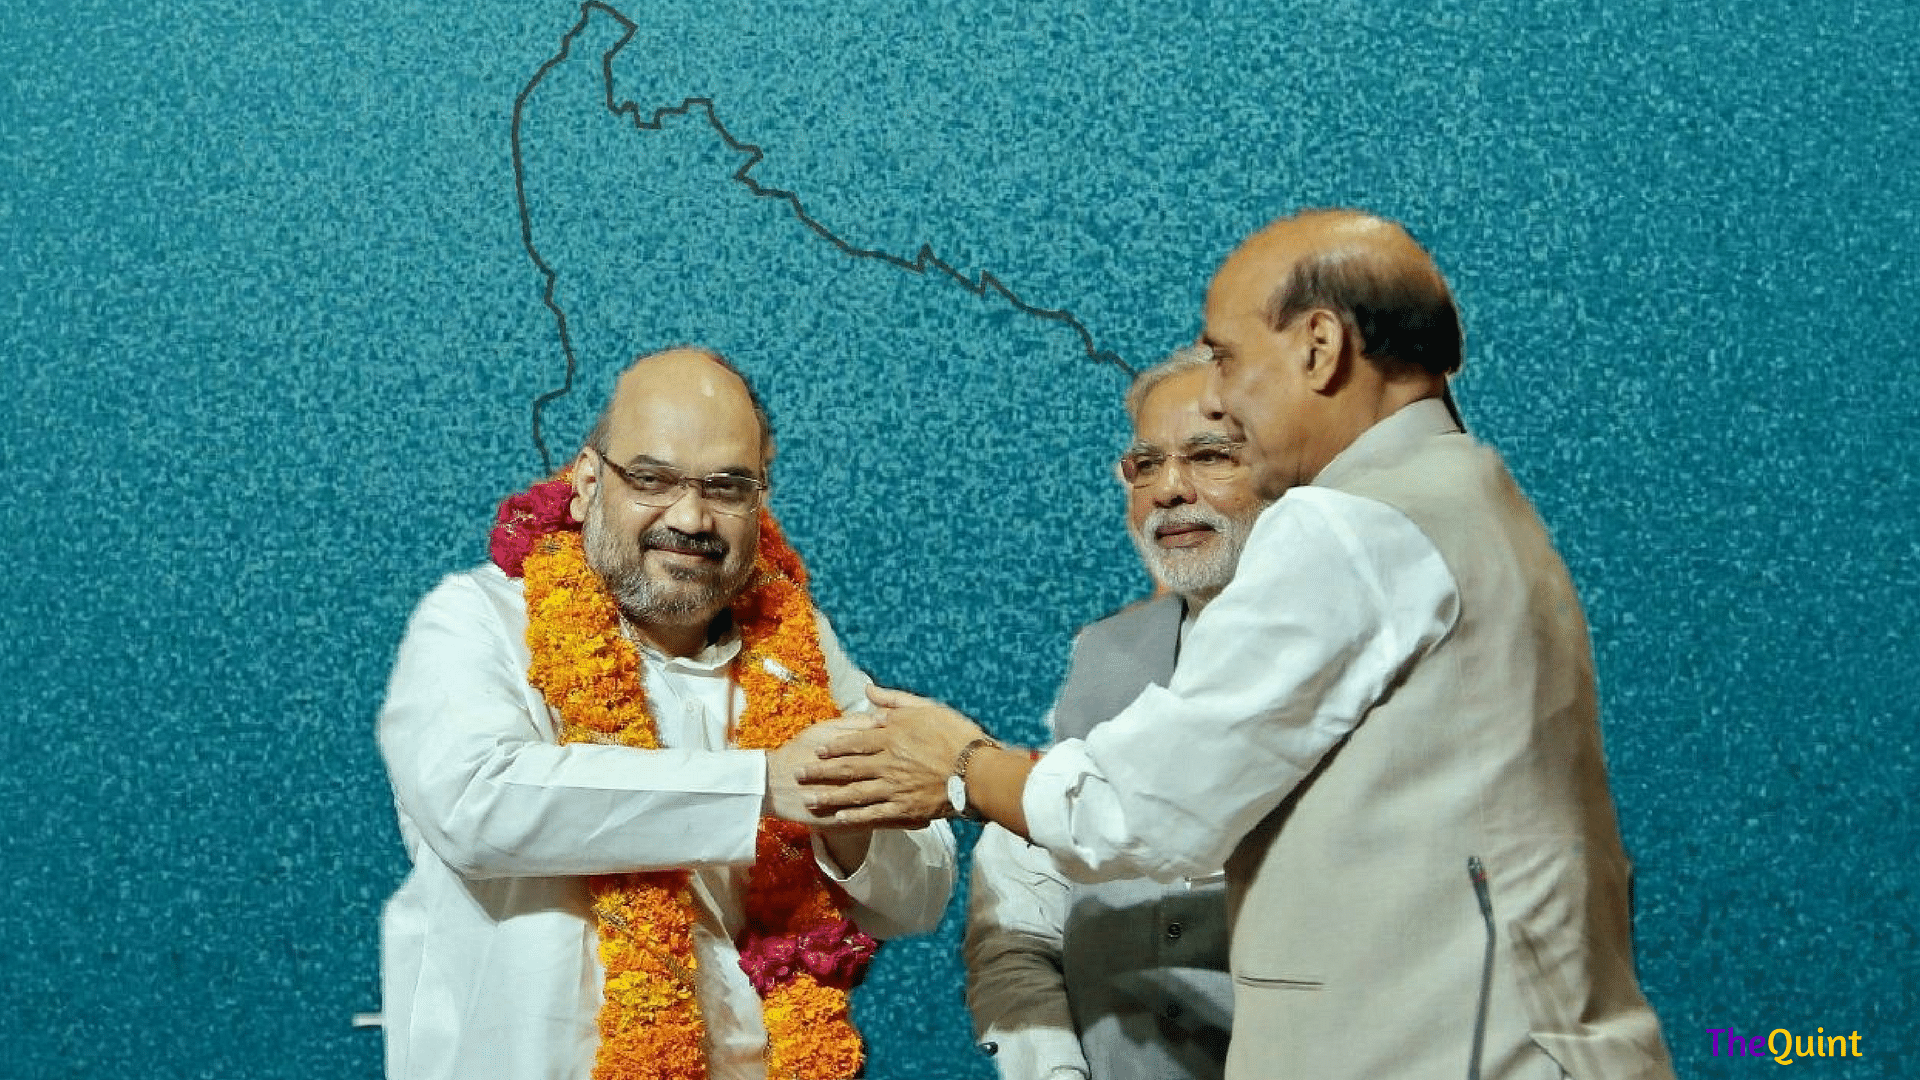 The BJP is afraid that this citadel of Hindutva could crumble in the face of Varanasi’s famously unpredictable people. (Photo: <b>The Quint</b>)